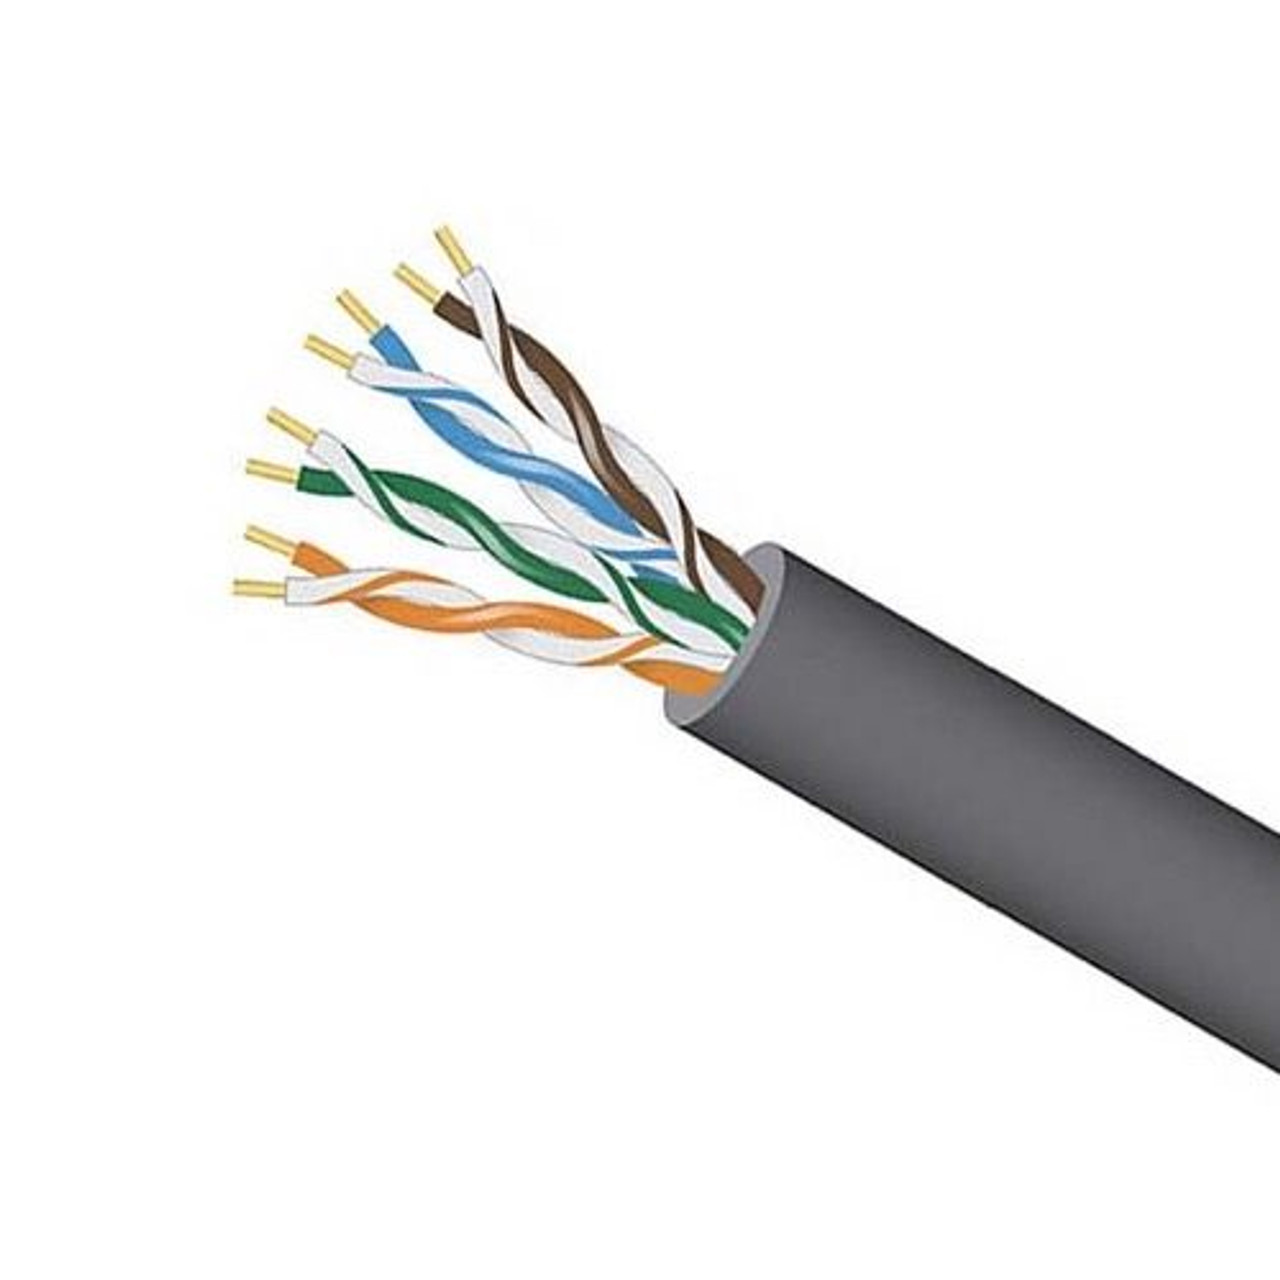 Summit 1000 FT CAT5E Cable Gray 24 AWG Solid Bare Copper UTP 350 MHz CWR Riser Rated Certified Bulk Cable Grey High Speed Ethernet Data Transfer Telephone Network Line, Part # 65504AGRCMRPB